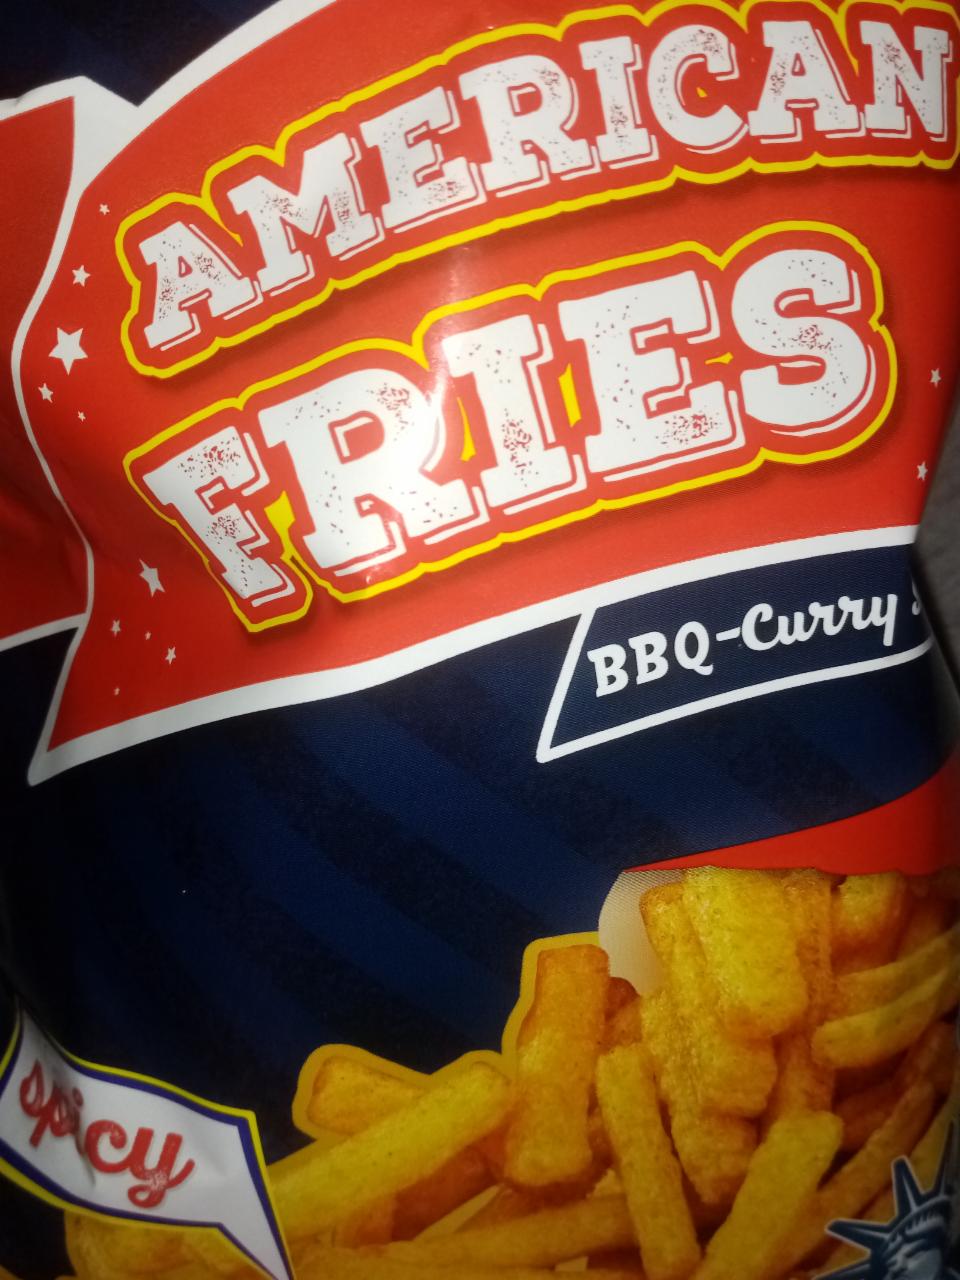 Fotografie - American fries bbq-curry